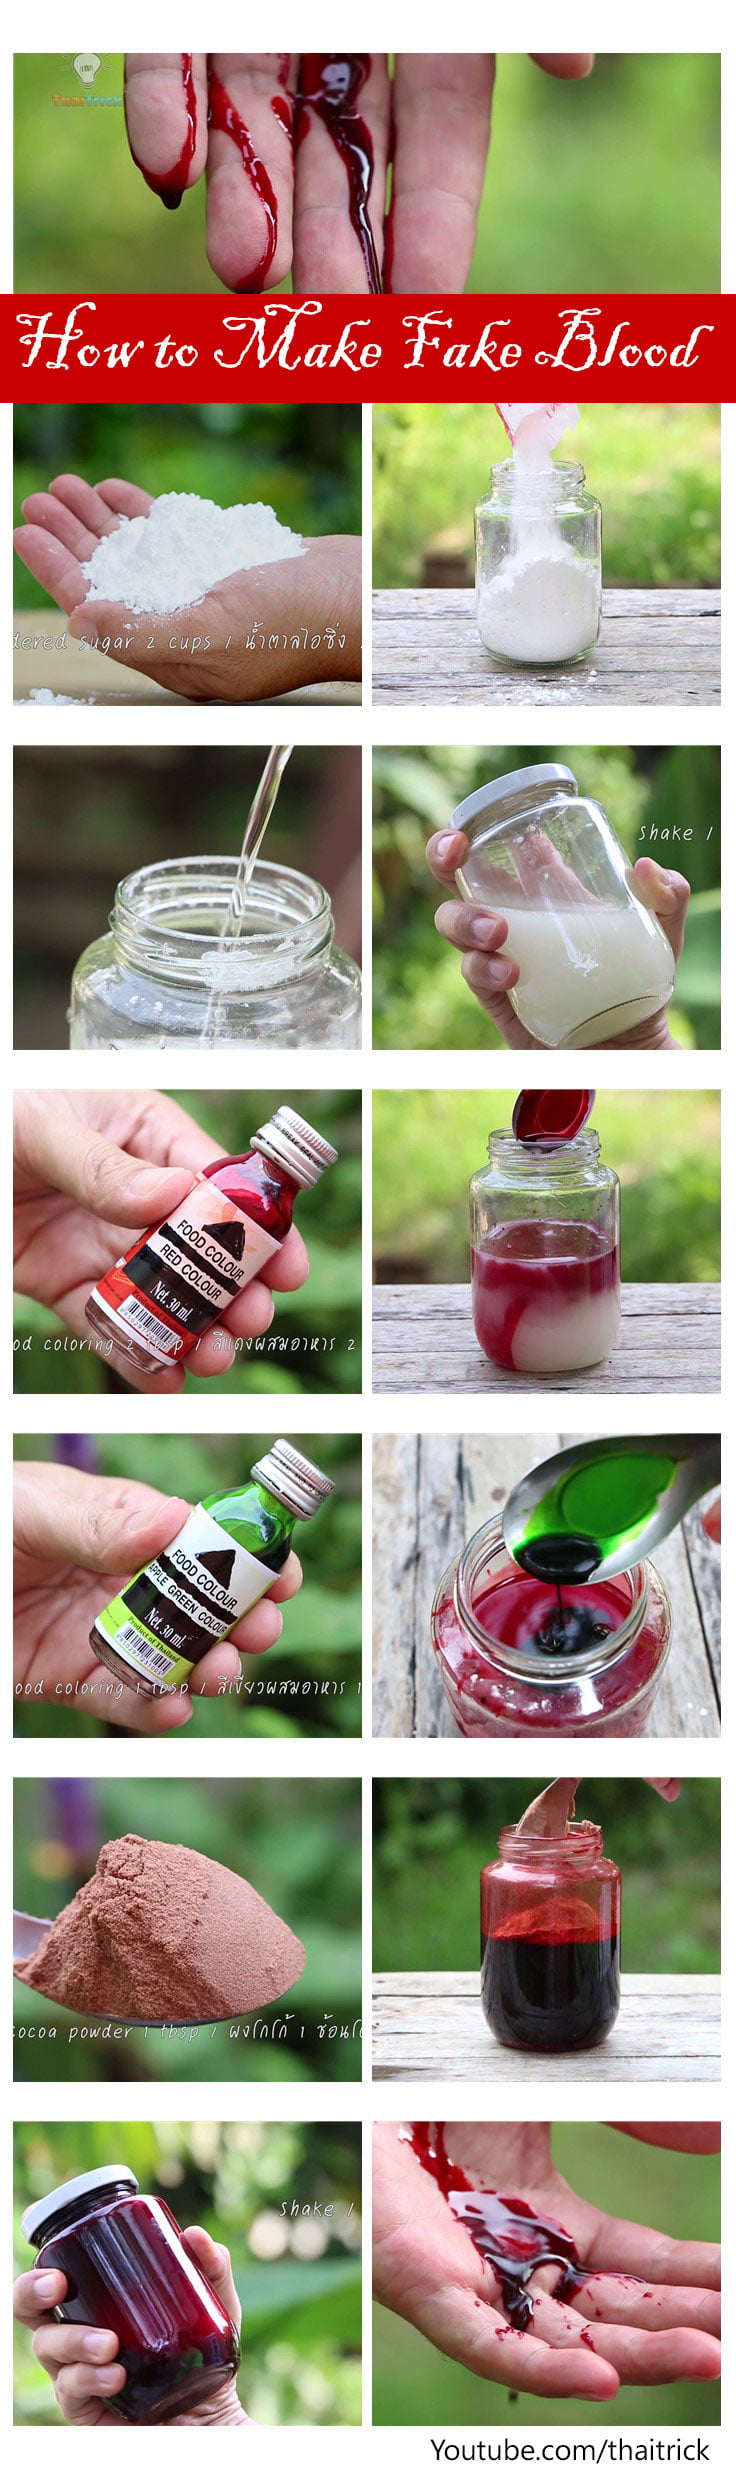 How to Make Fake Blood: Try This Medically Inspired Recipe